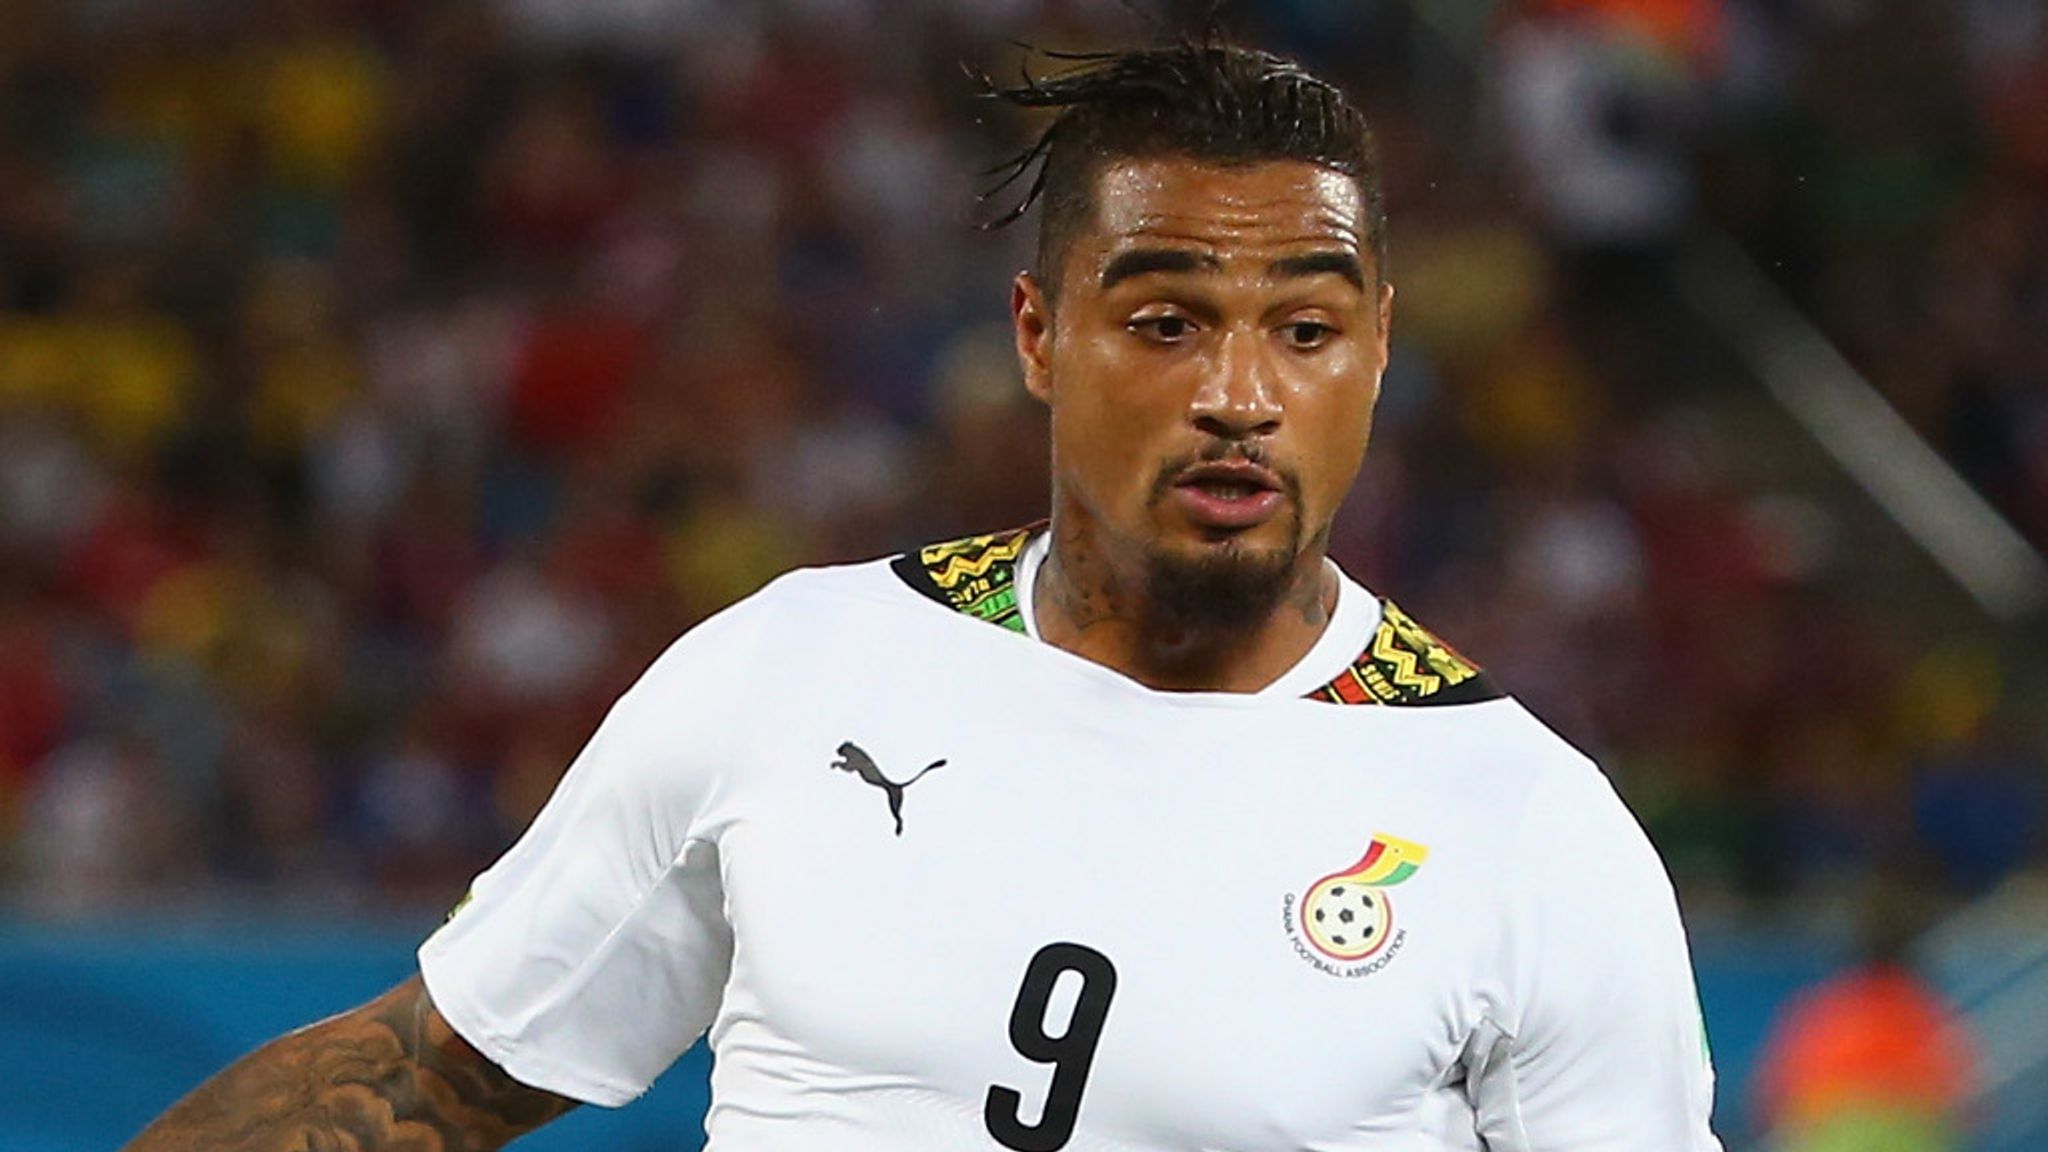 AFCON 2021: Ghana Should Have Just Called Me – Kevin-Prince Boateng On Black Stars’ Defeat